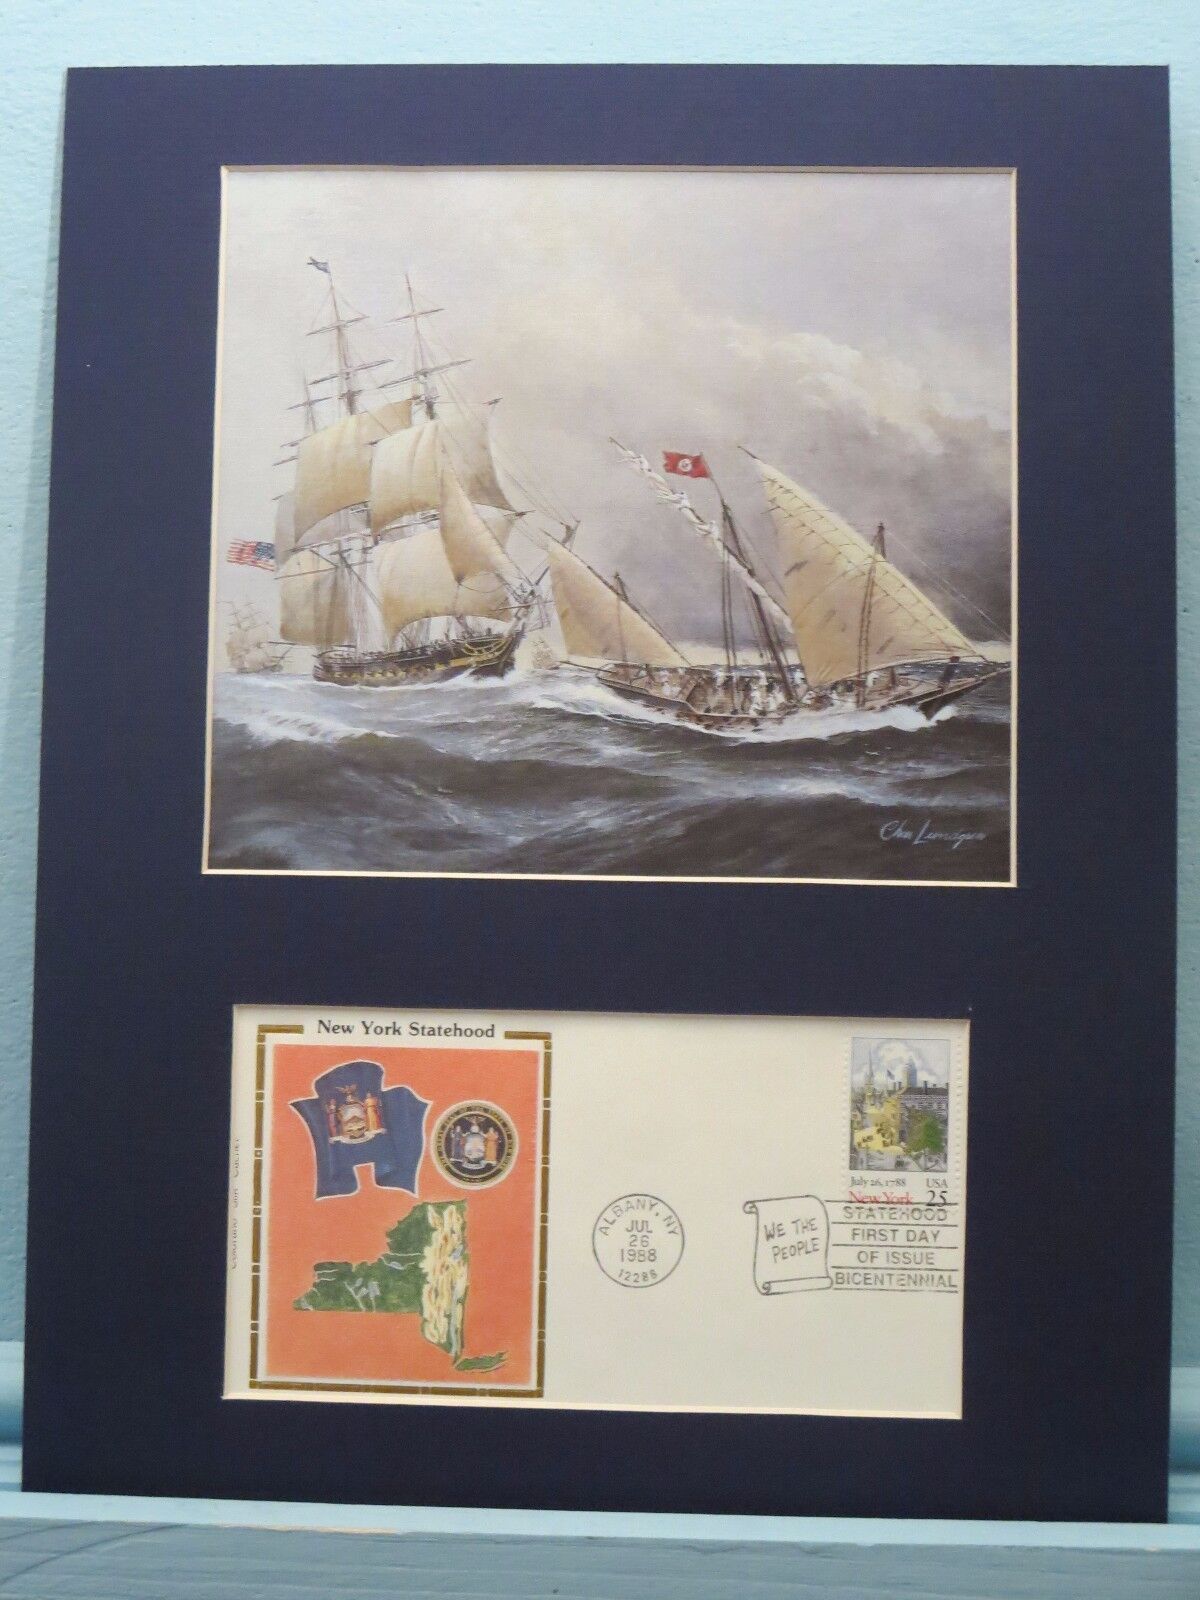 The USS New York in the Barbary Wars & First Day Cover honoring New York State